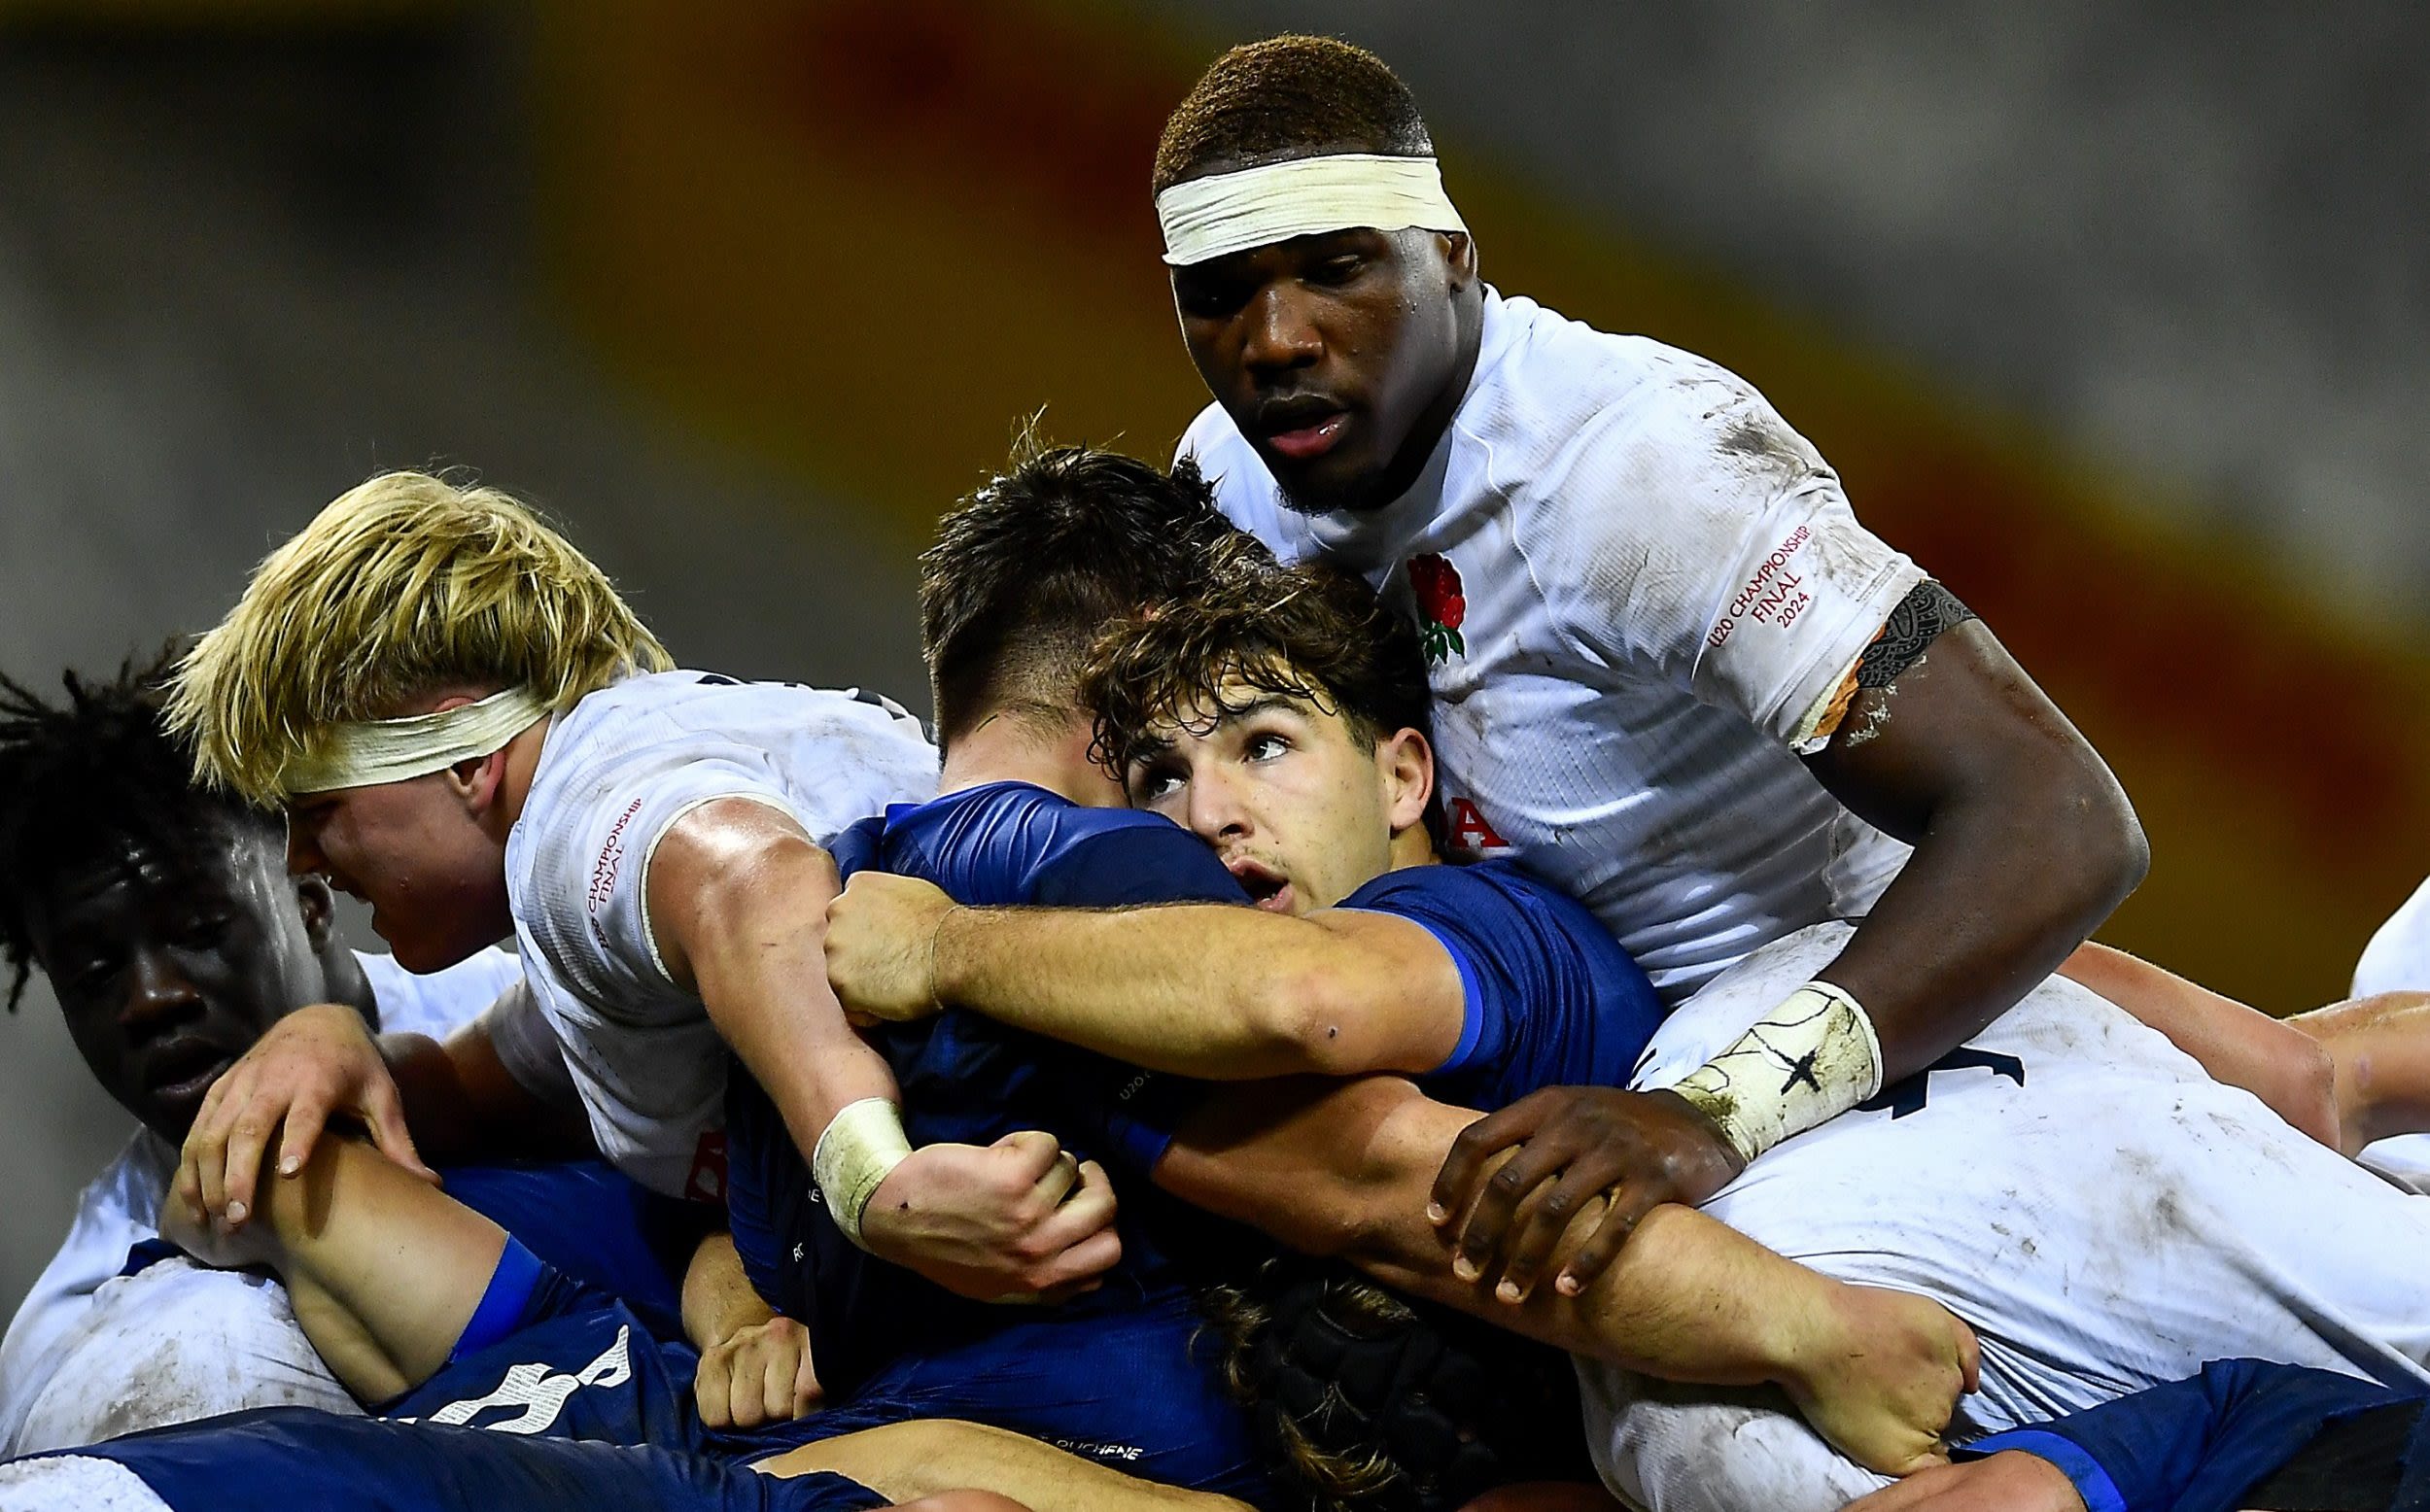 England Under-20s’ brutal pack could become huge weapon at 2027 World Cup